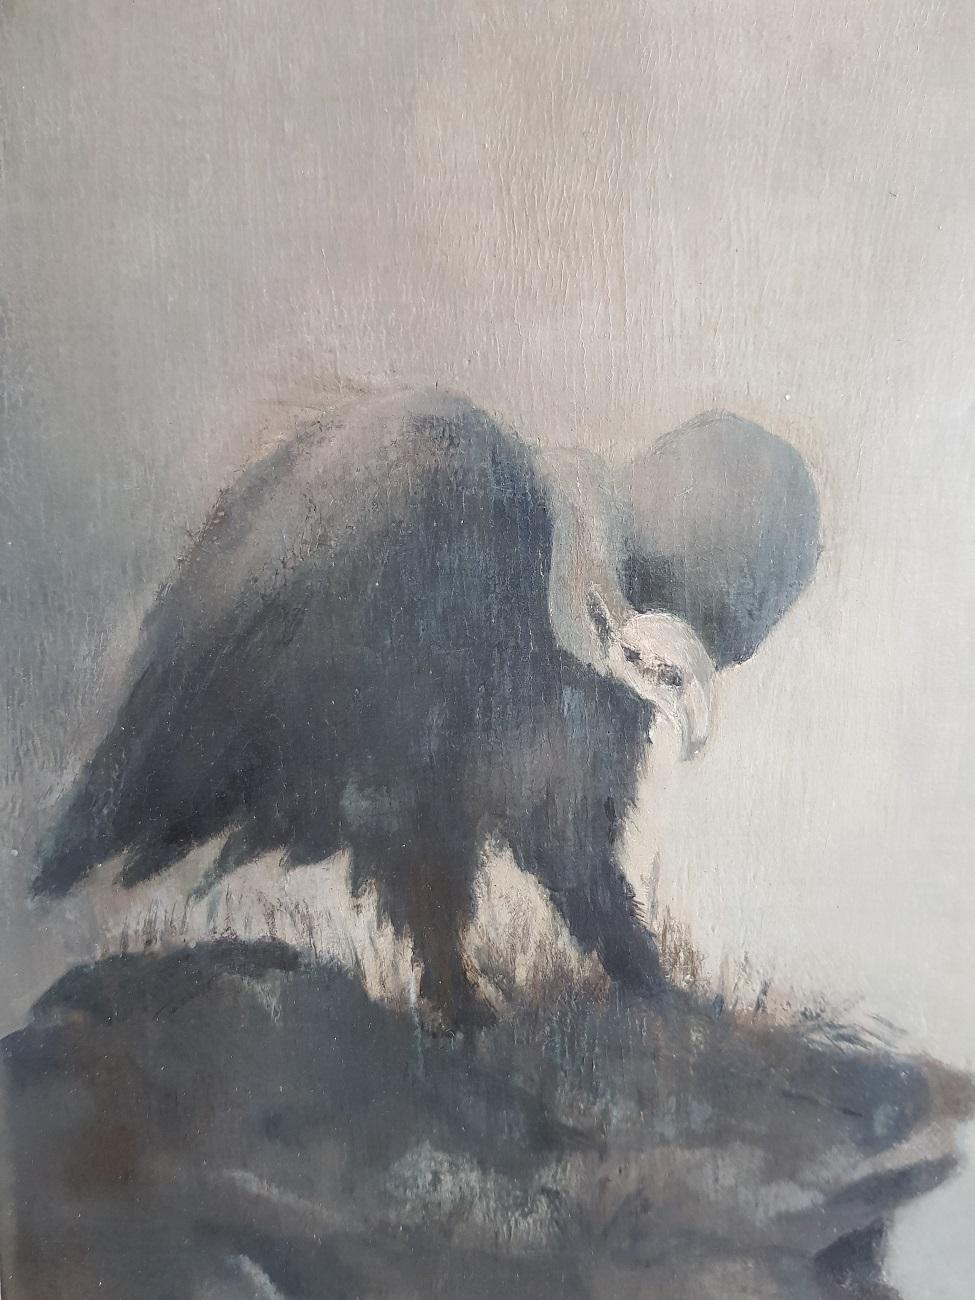 Hand-Painted Oil Painting by Unknown Artist, Depicting a Vulture Standing on a Rock